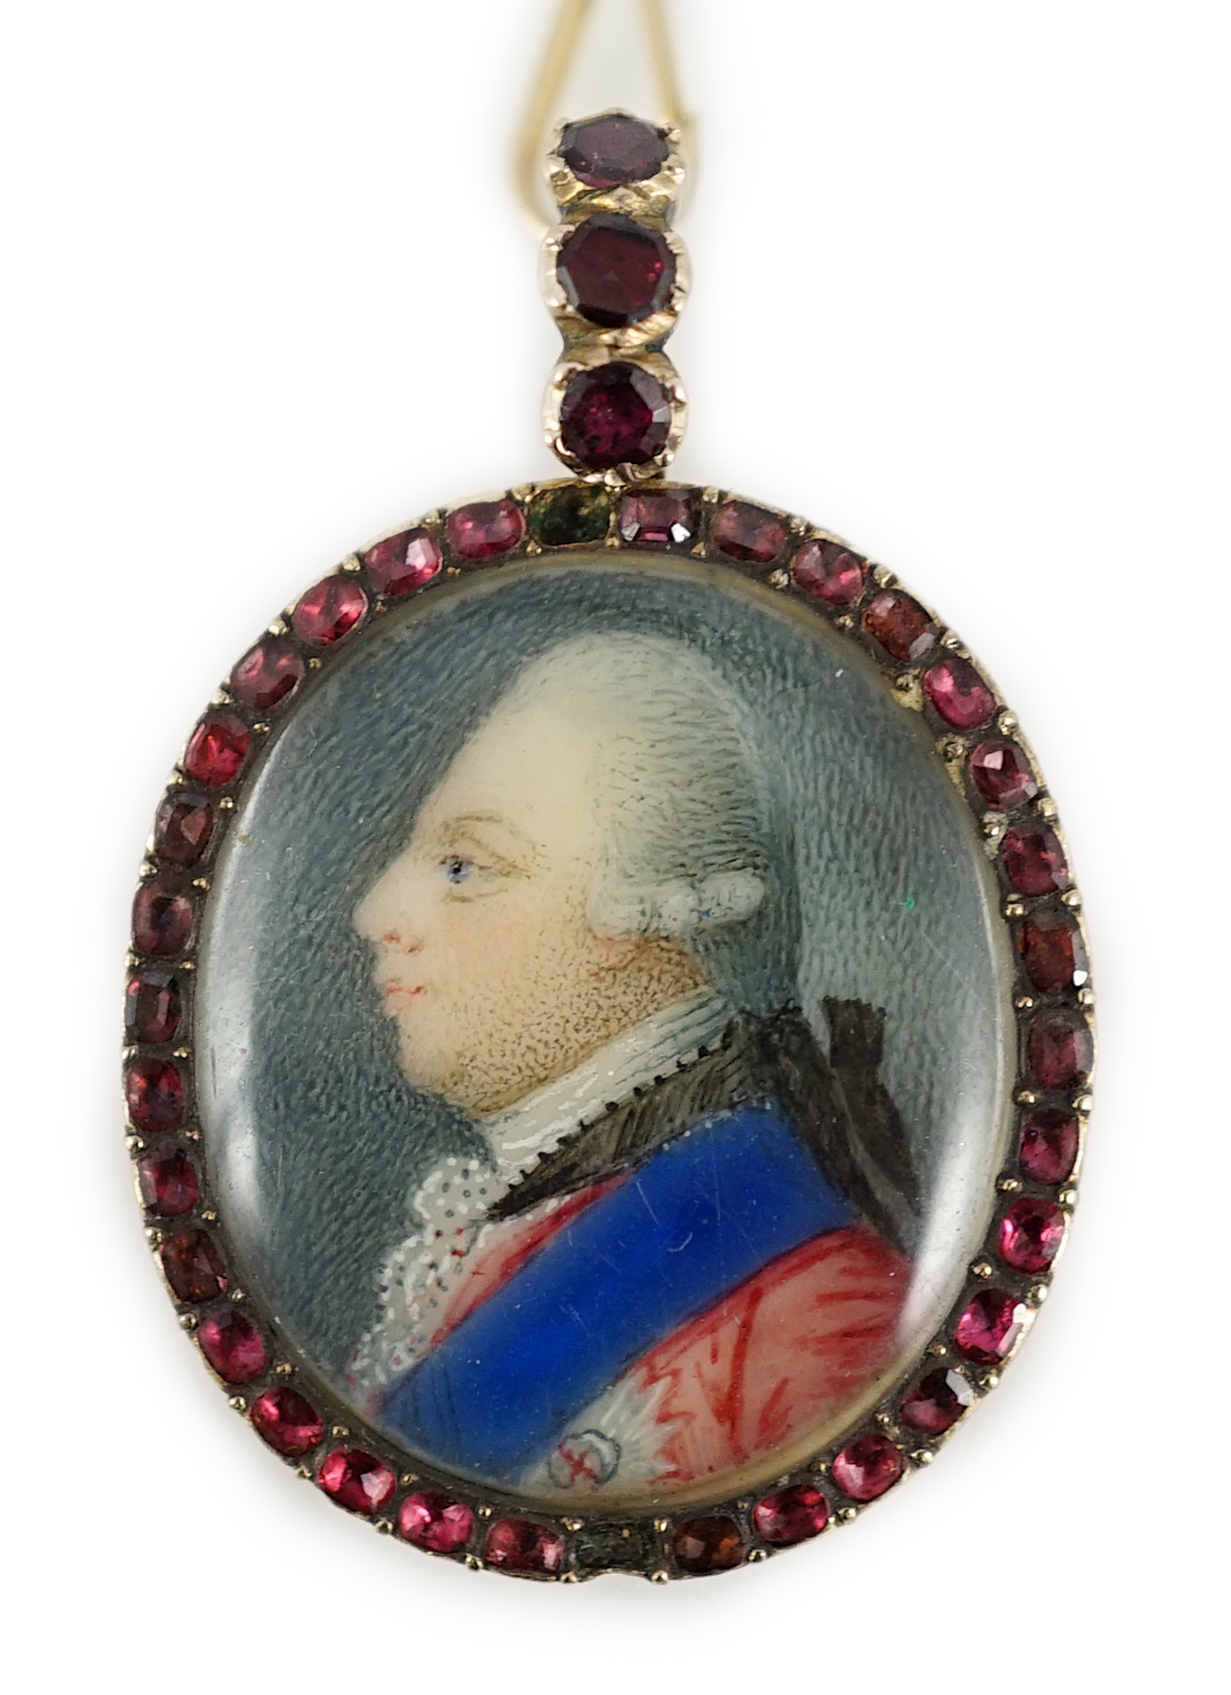 A George III Royal Presentation gold mounted and garnet set oval pendant, with inset miniature portrait of a gentleman to dexter, verso engraved 'The Gift of Queen Charlotte to E. Whitfield, 1770